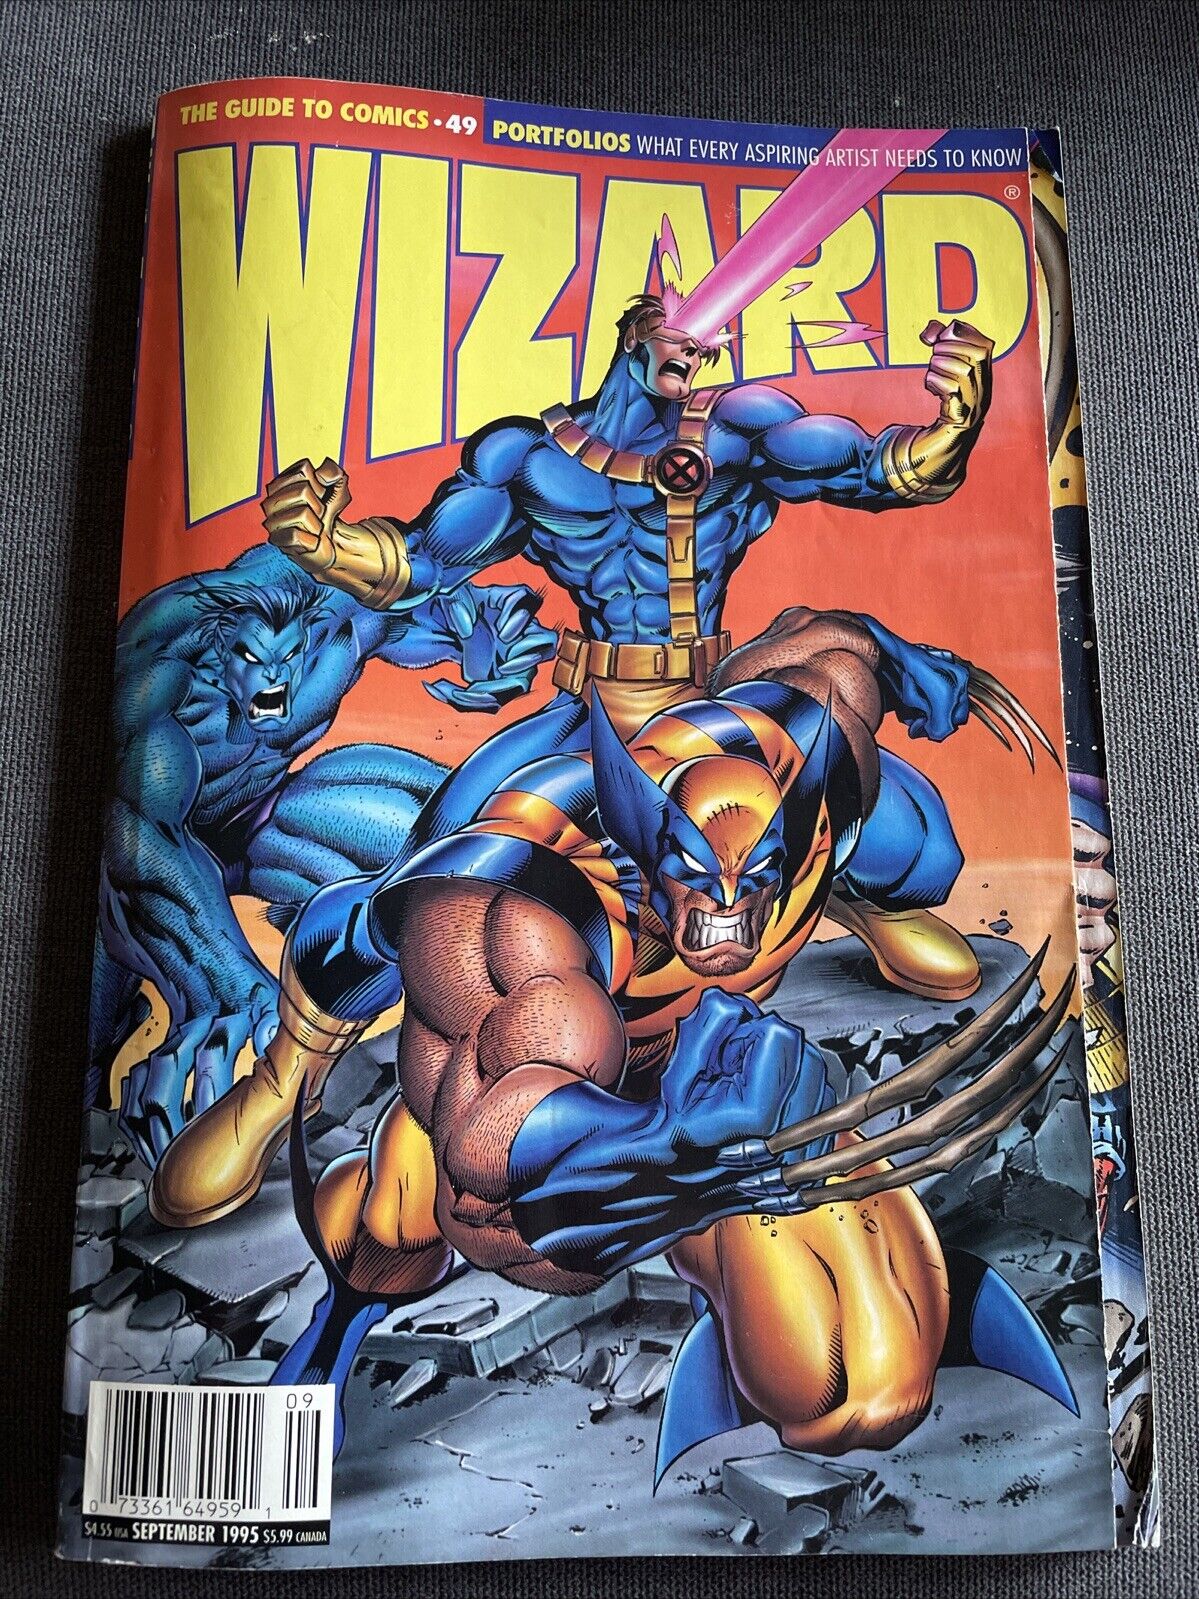 Wizard - The Guide To Comics #49 (Fair Condition)